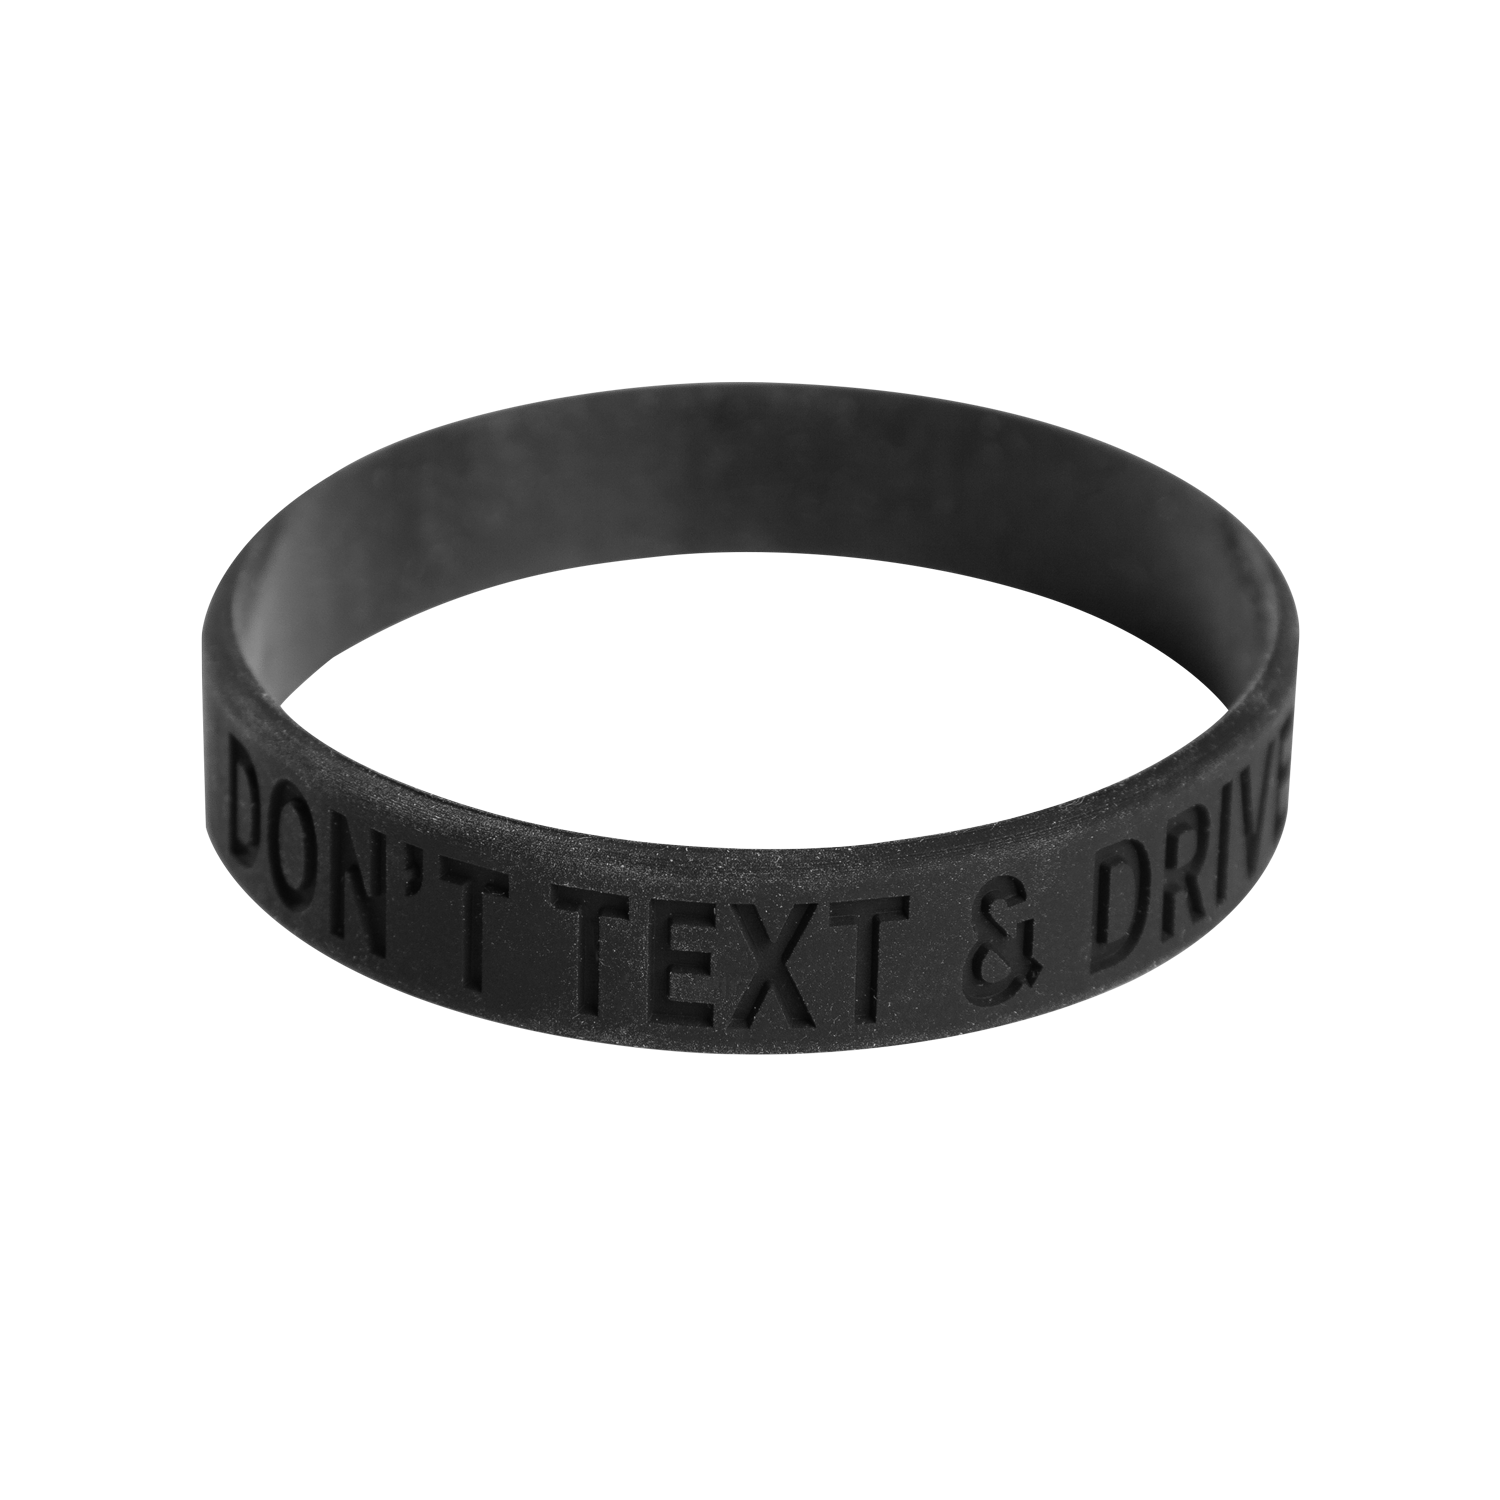 Don't Text and Drive Bracelet